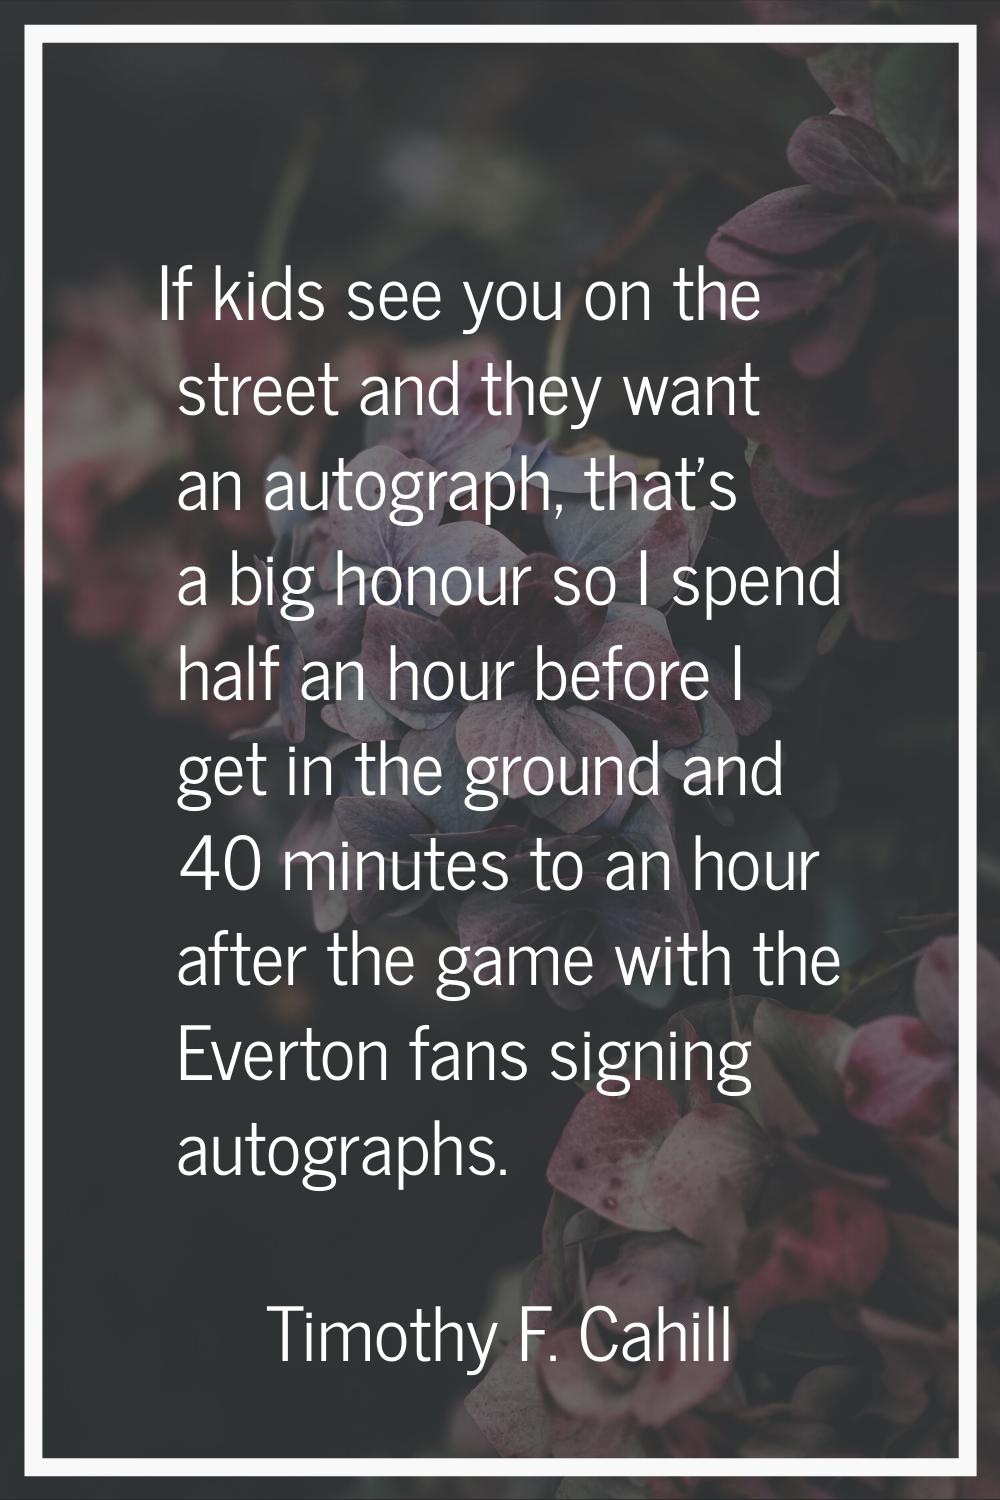 If kids see you on the street and they want an autograph, that's a big honour so I spend half an ho